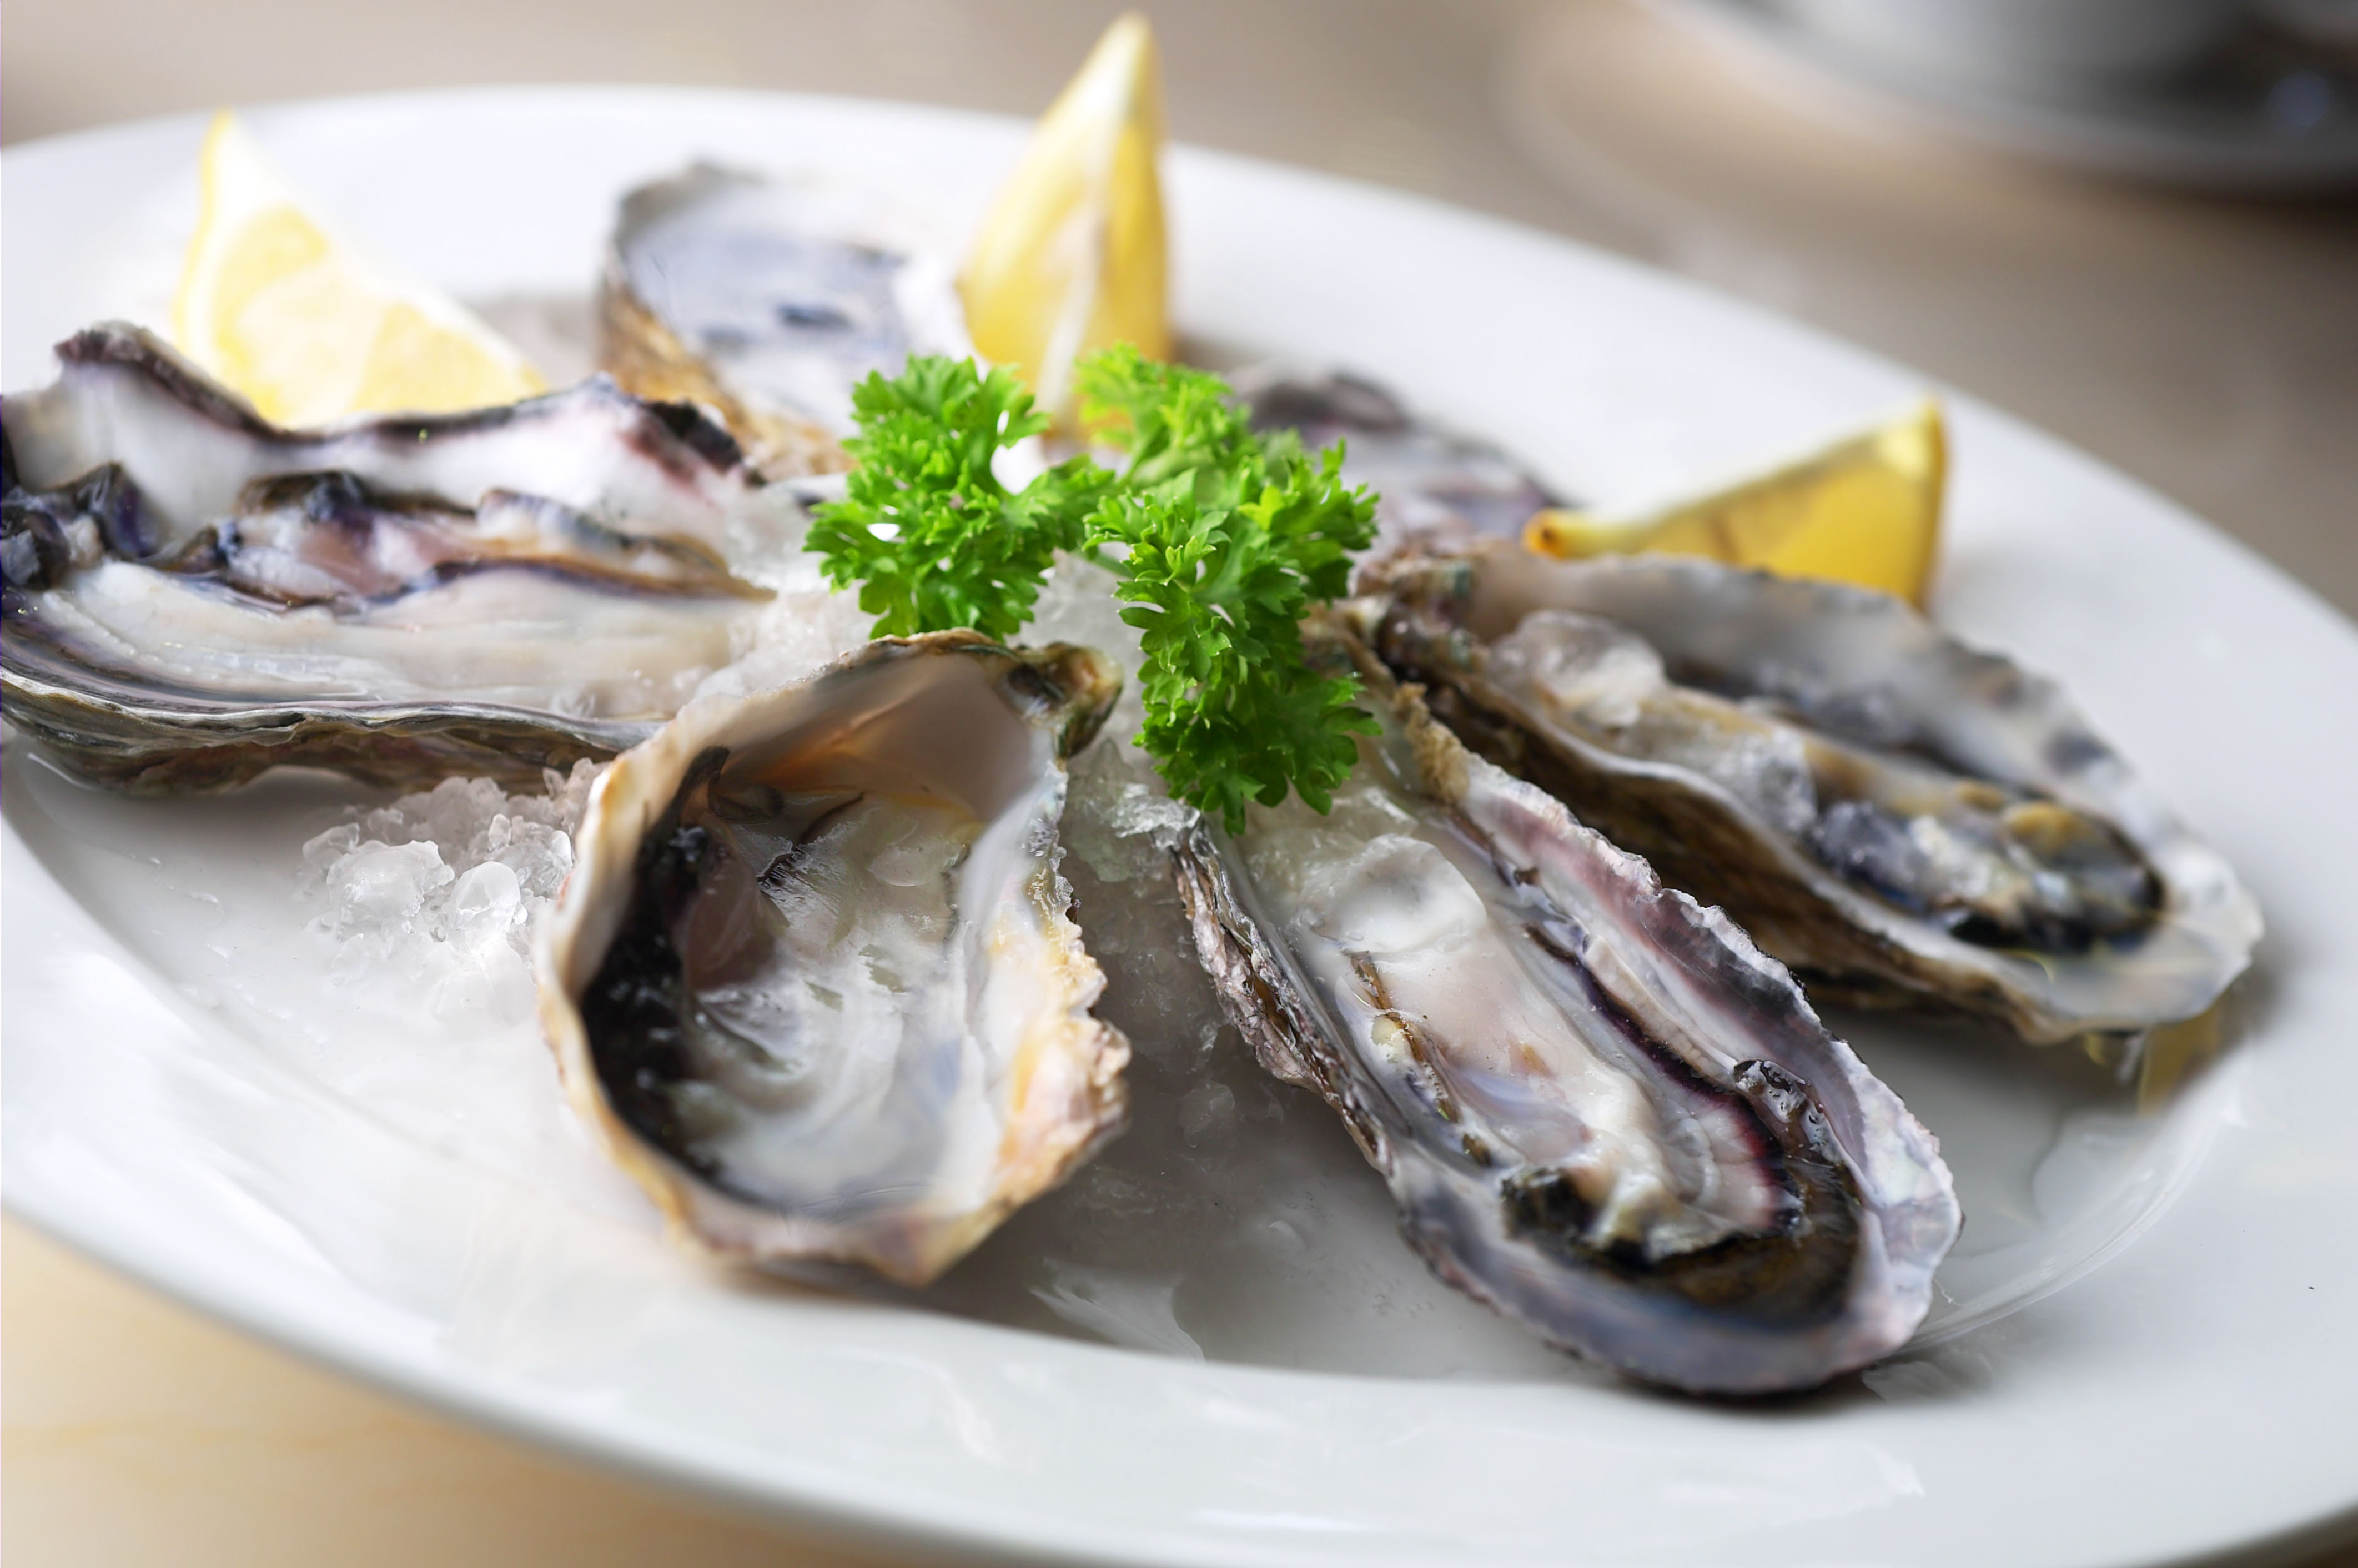 Fresh oysters are the specialty of Ston area